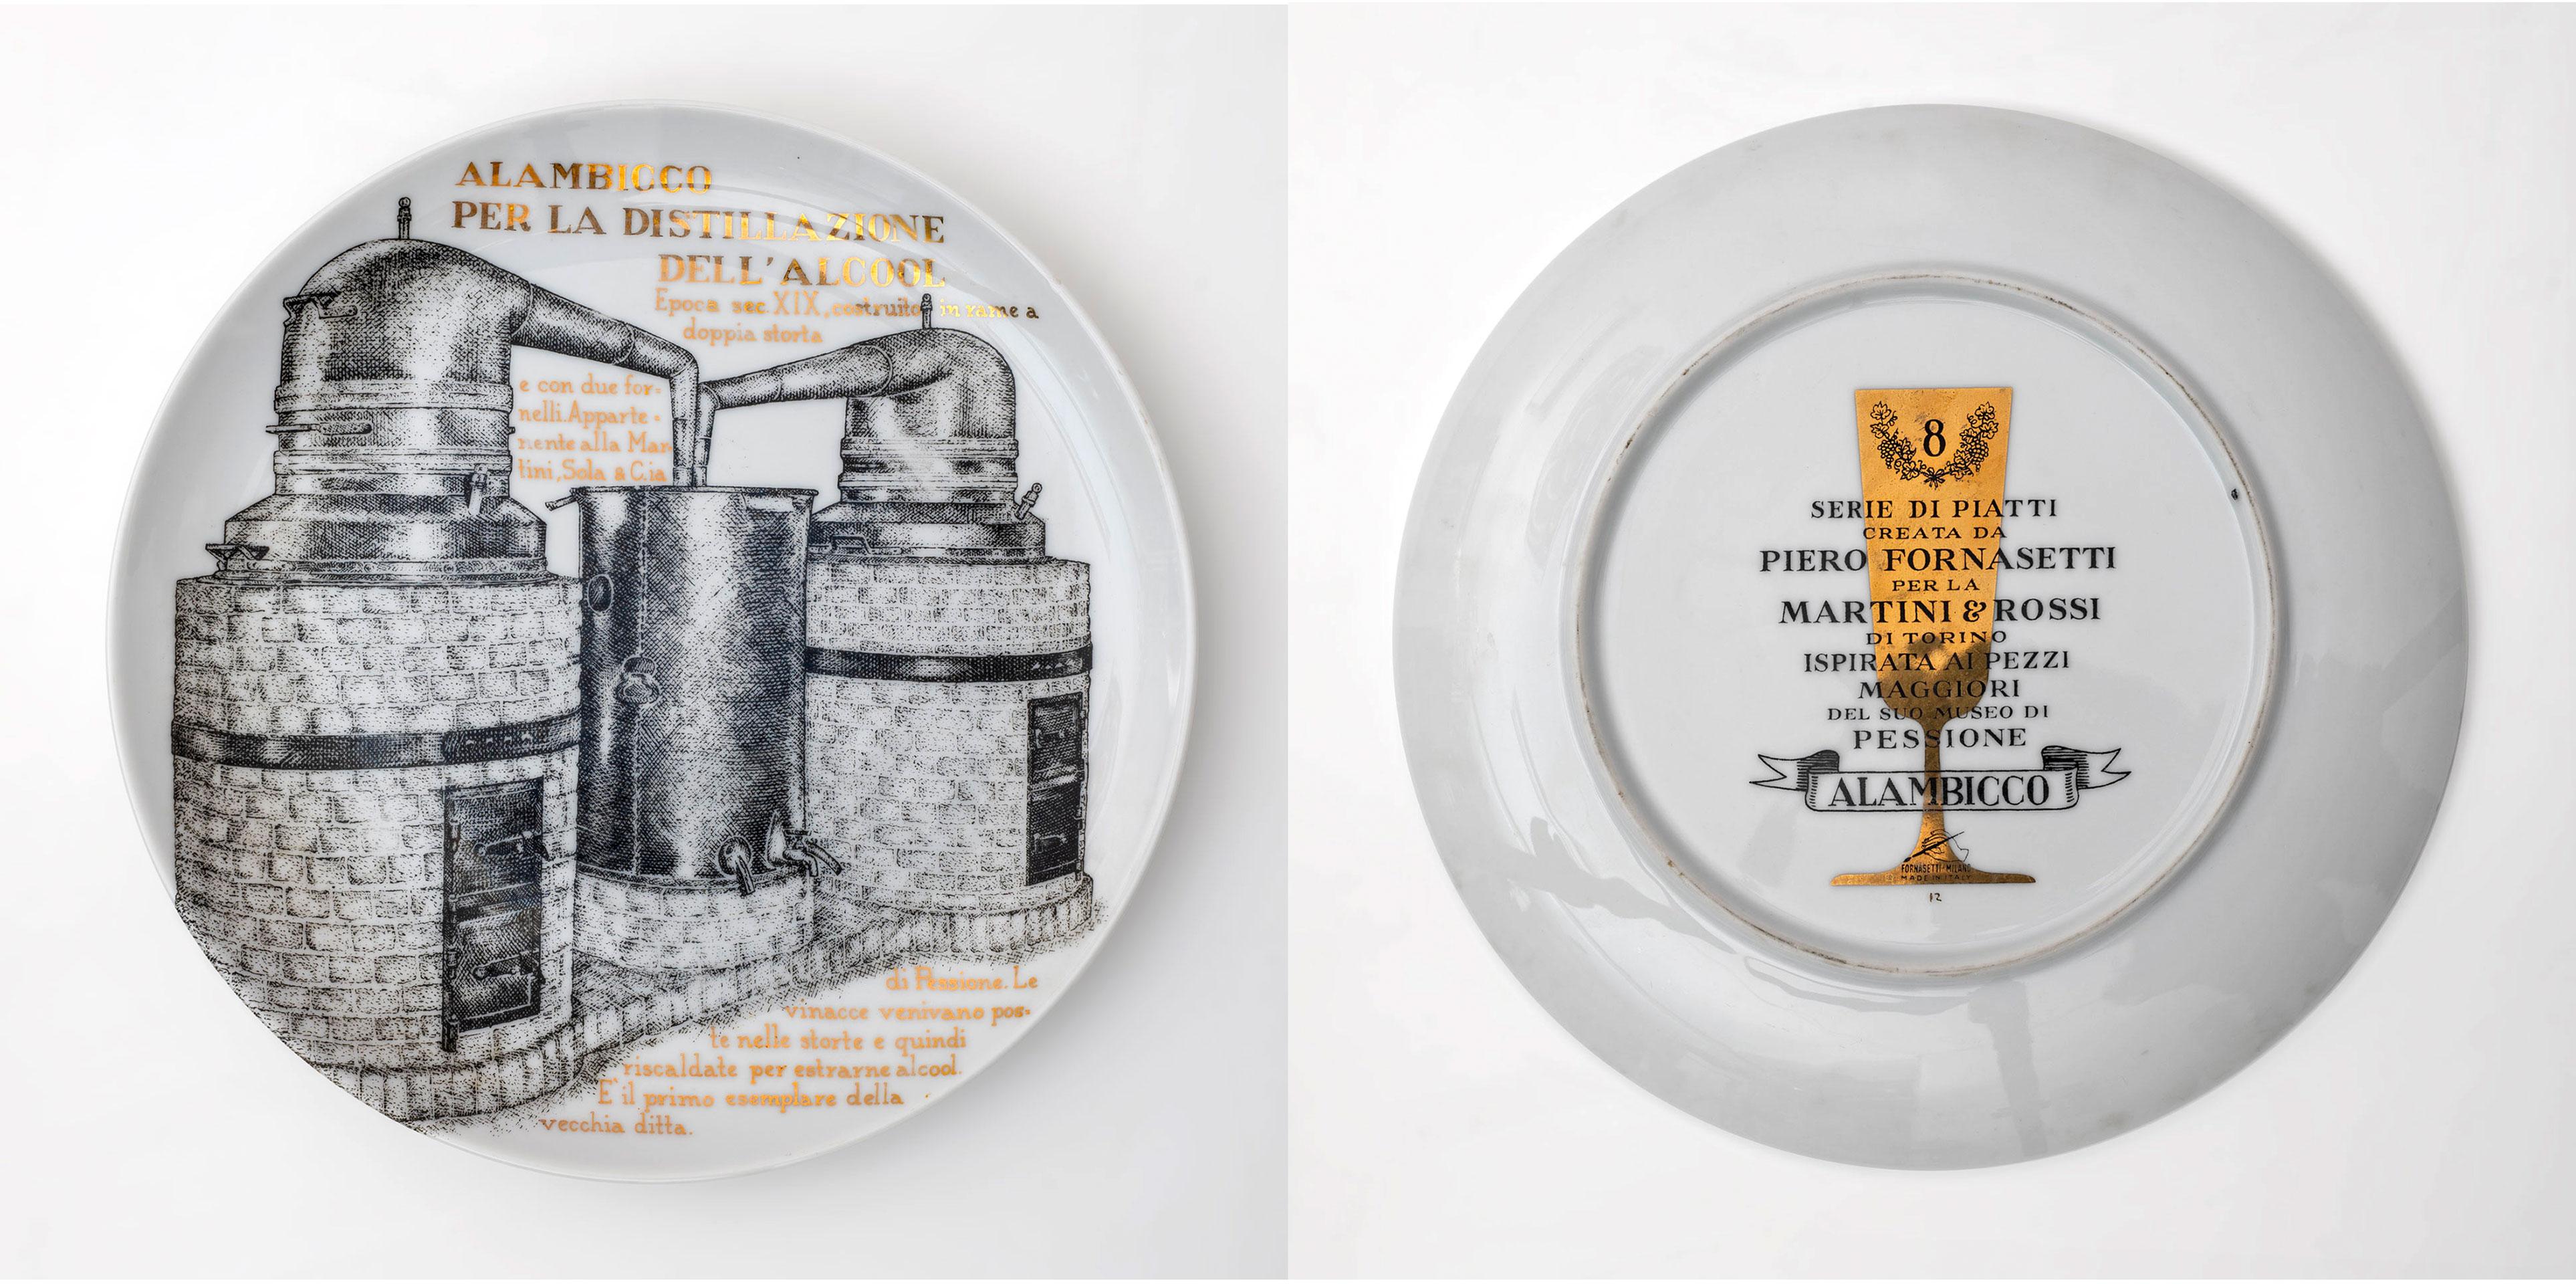 Set of P. Fornasetti Decorative Porcelain Plates for Martini & Rossi, 1960s For Sale 3